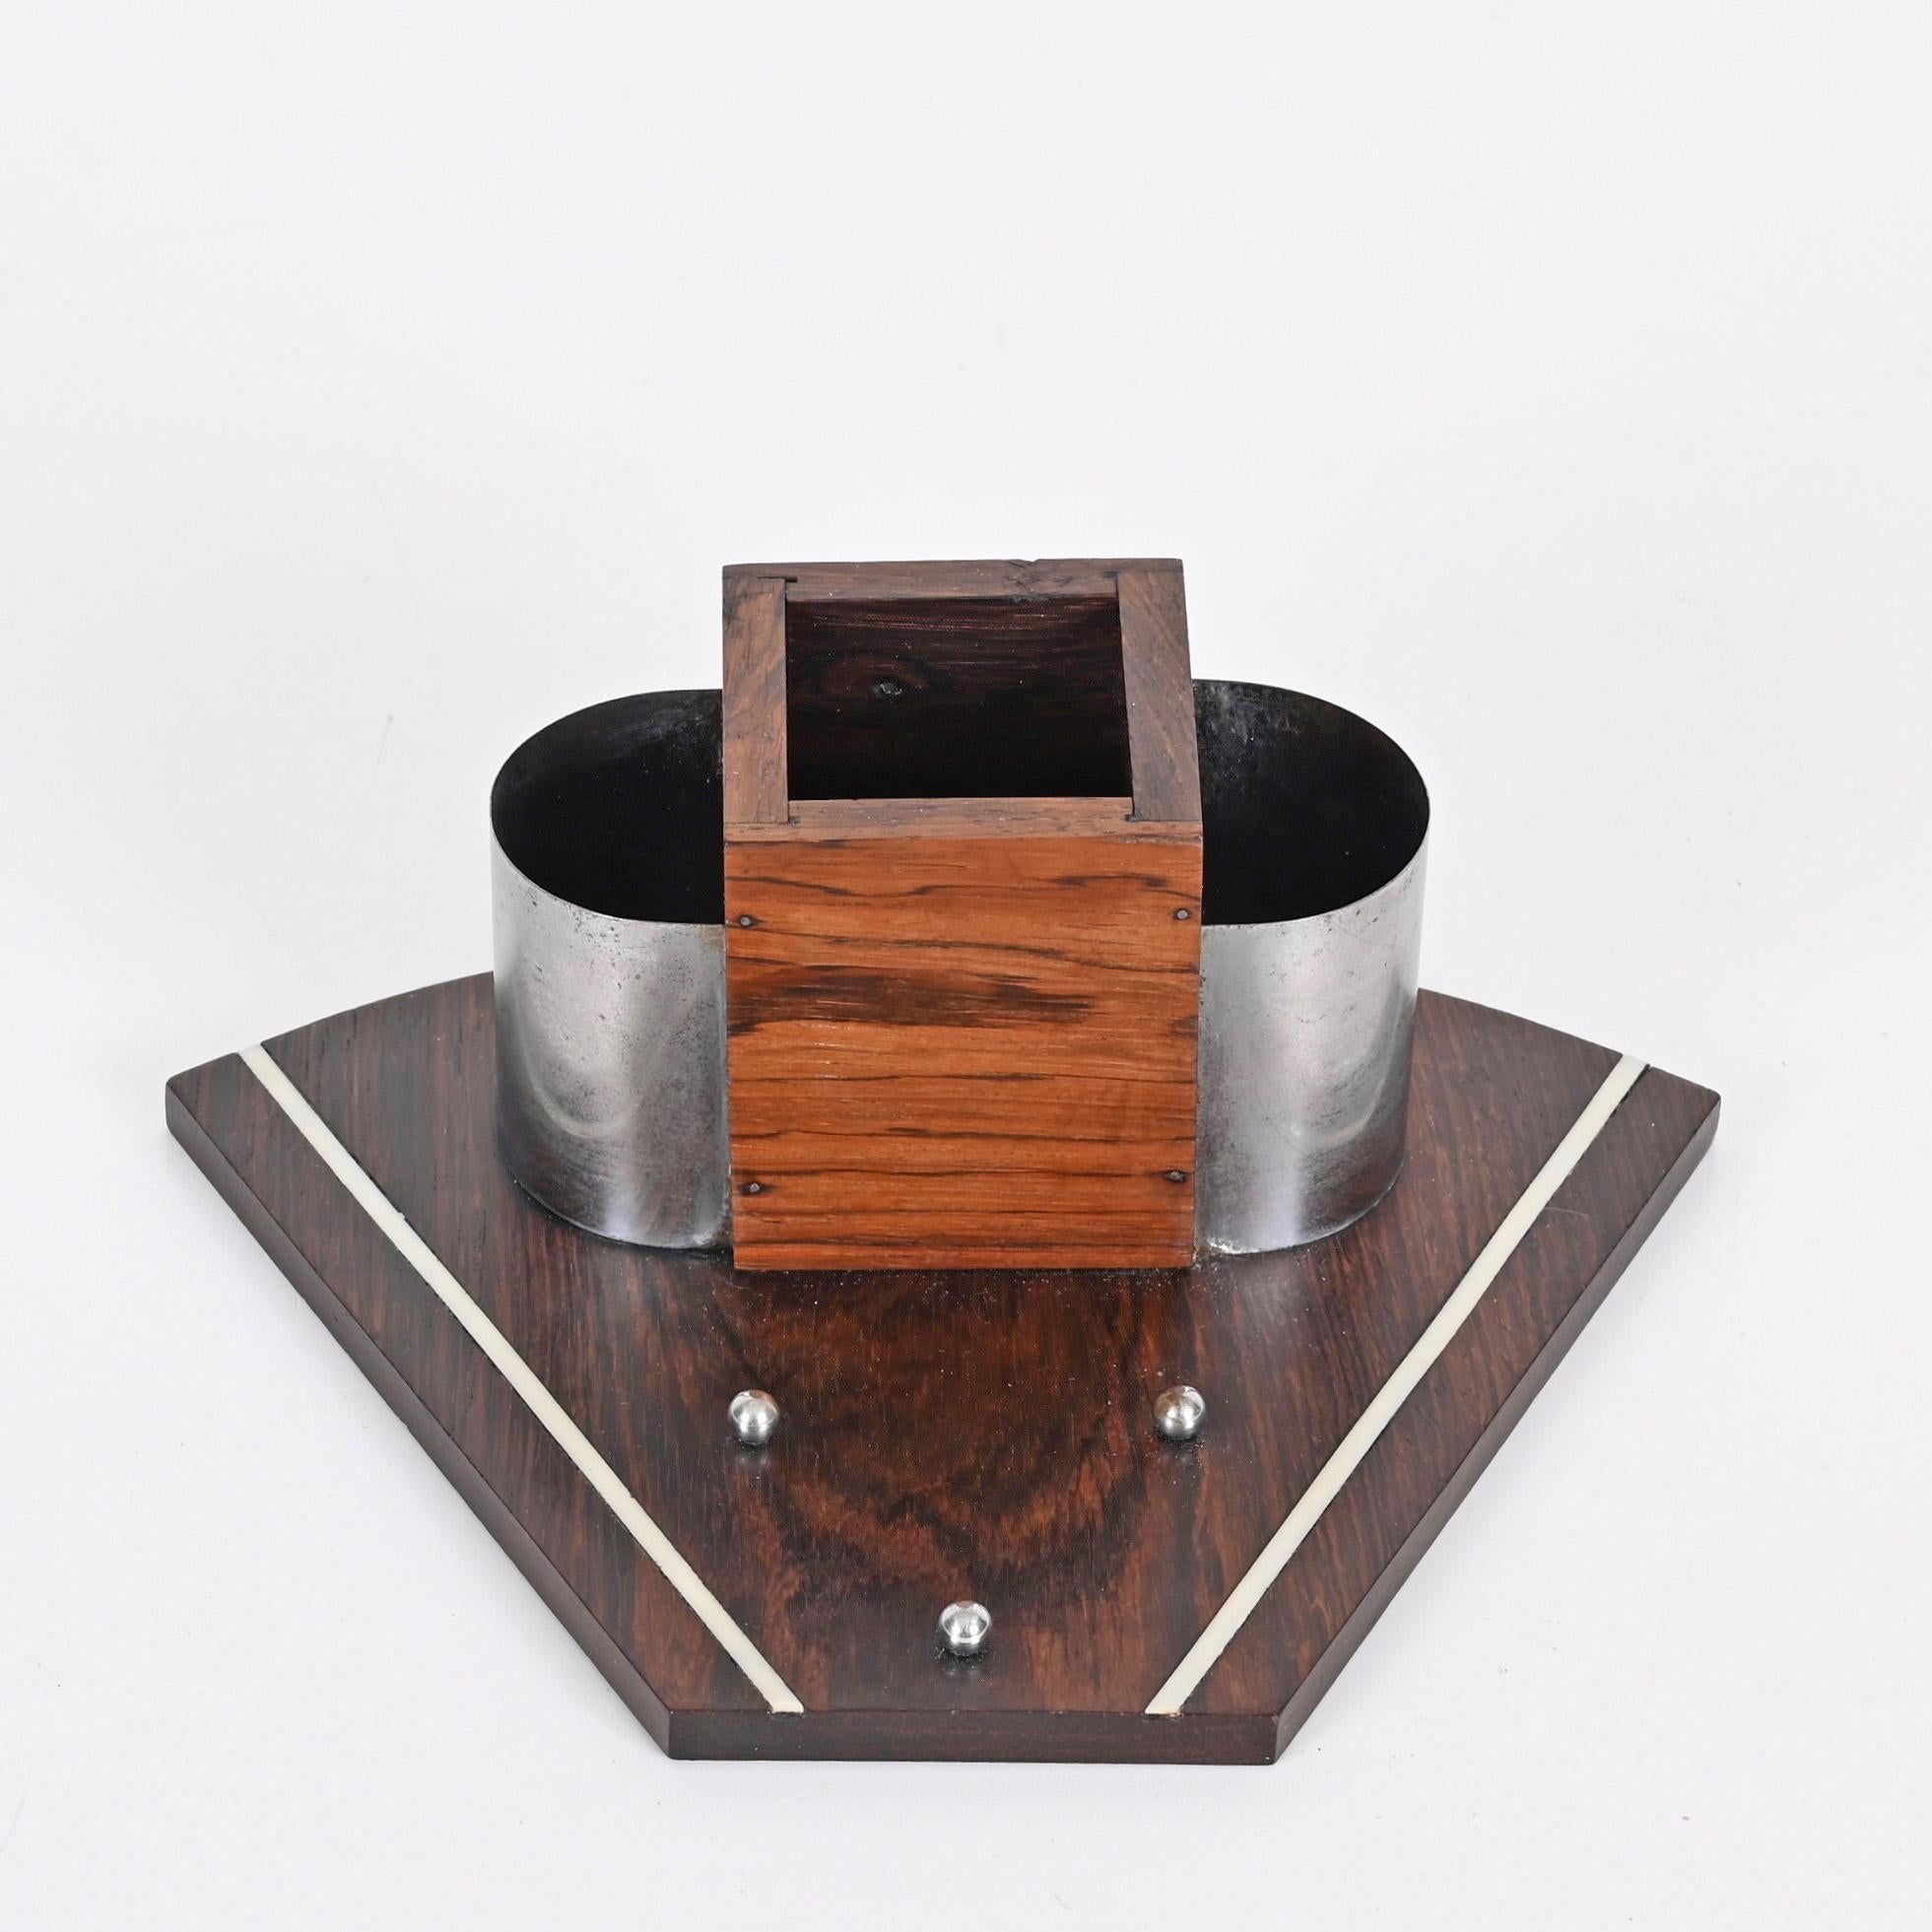 Metal Art Deco Pen Holder in Macassar Wood, Italy Desk Accessory from the 1930s For Sale